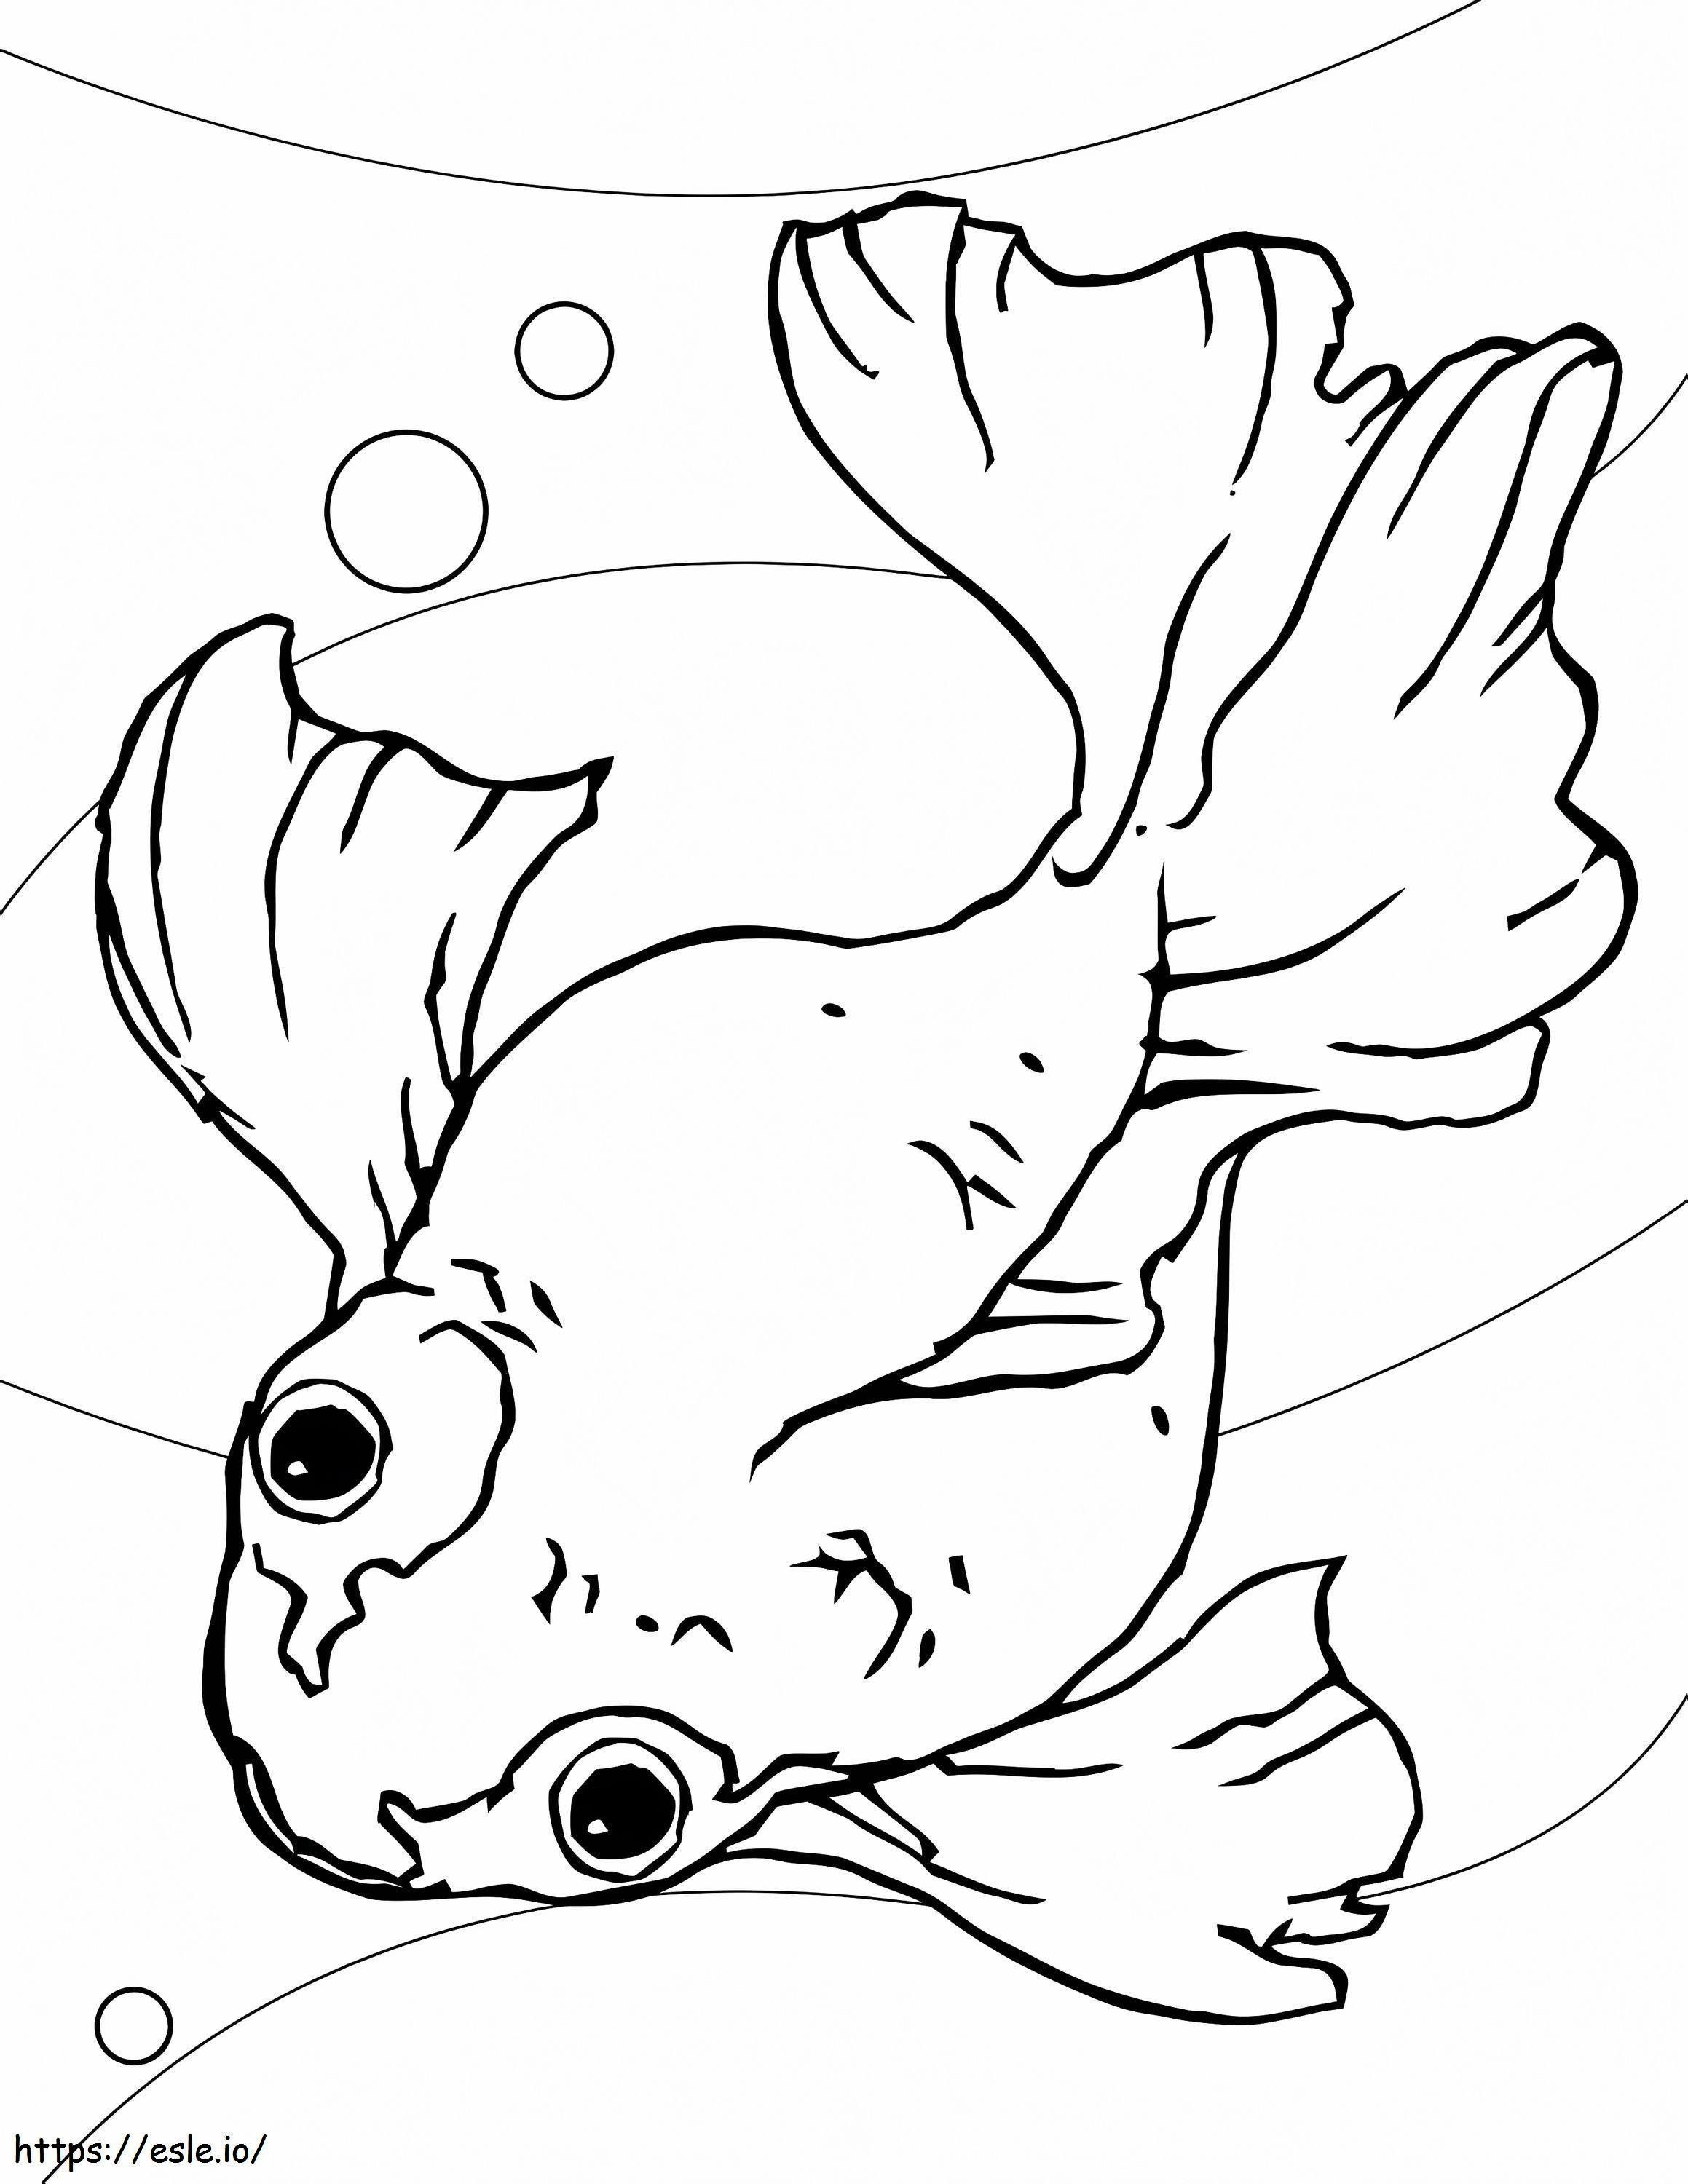 Goldfish 5 coloring page